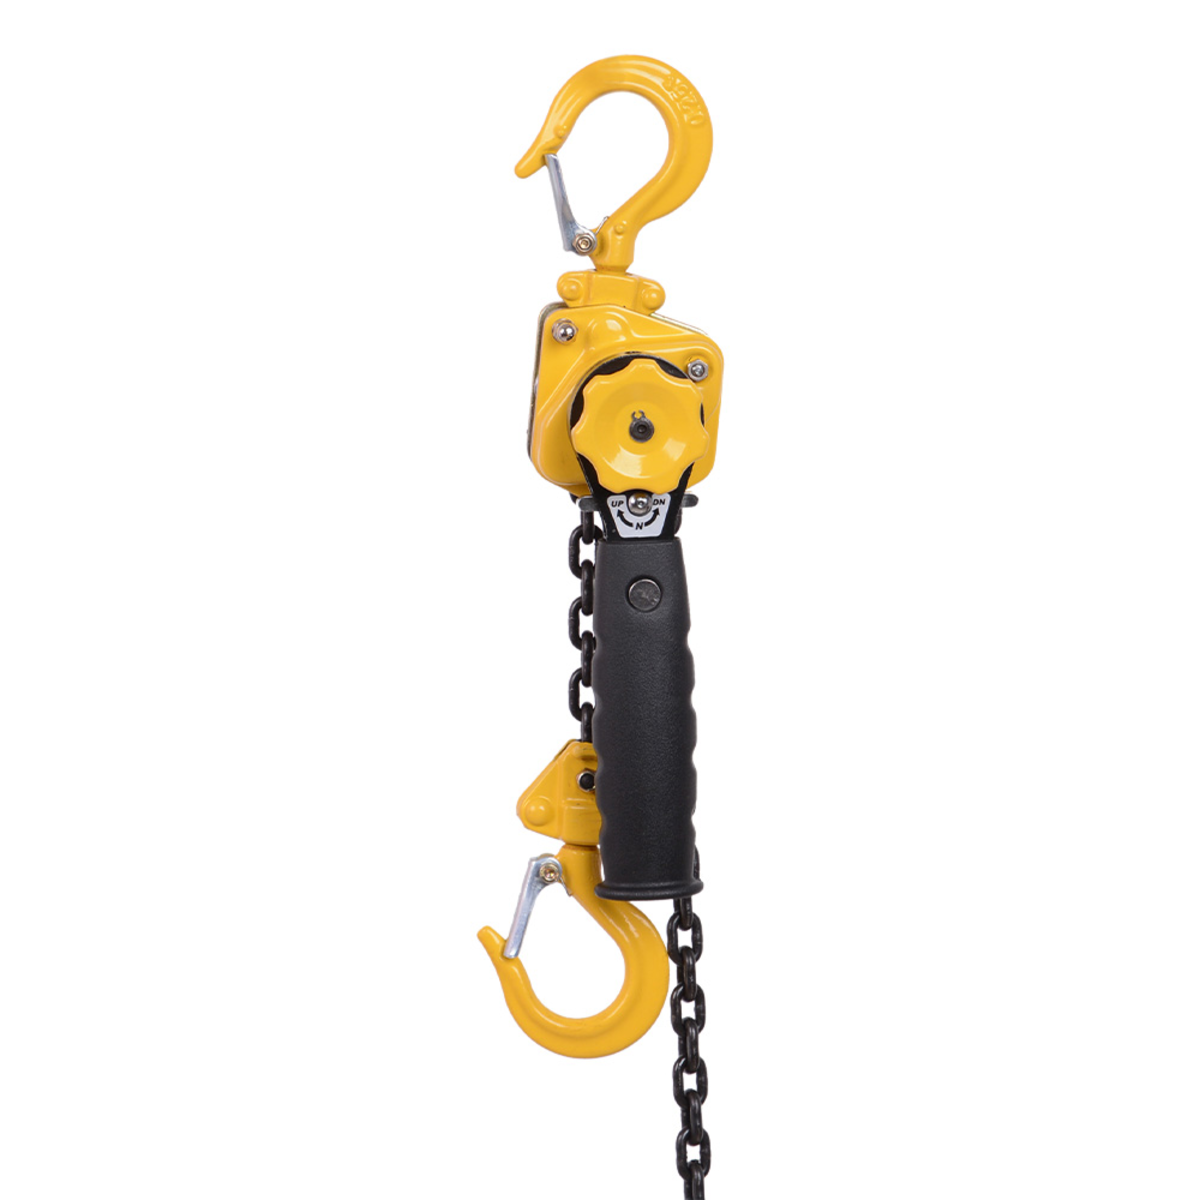 1/2 Ton lever Hoist with 15 ft. chain fall